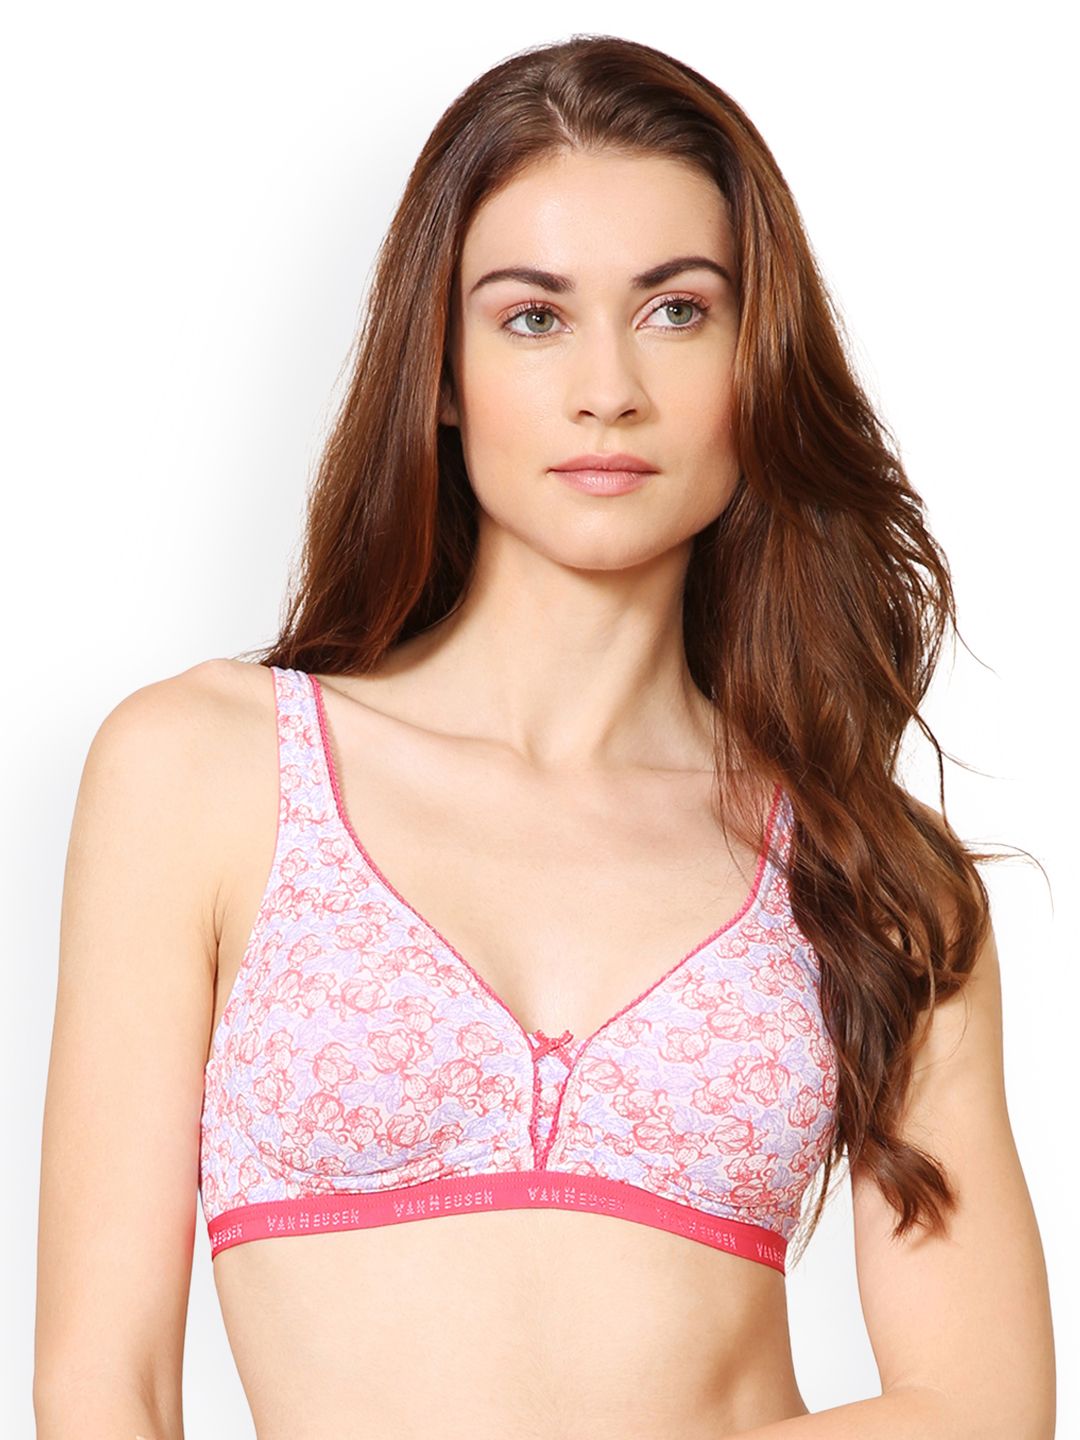 Van Heusen Pink Printed Non-Wired Non Padded Everyday Soft Cup Bra ILIBRACSPWW8011010 Price in India